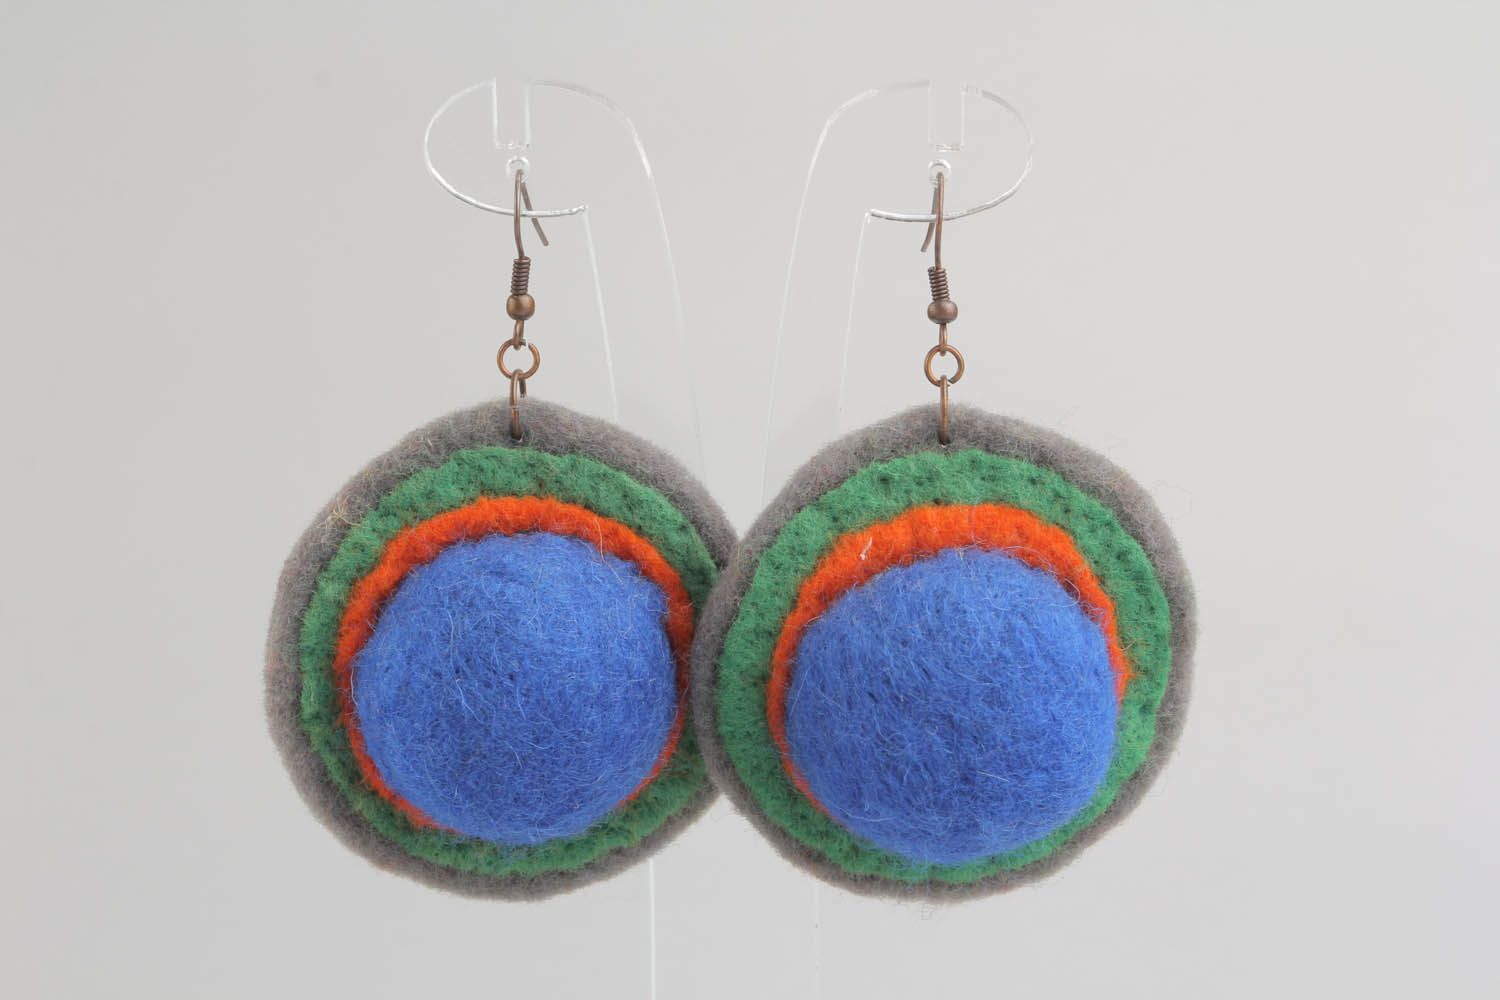 Round earrings made of wool and felt using felting technique photo 5